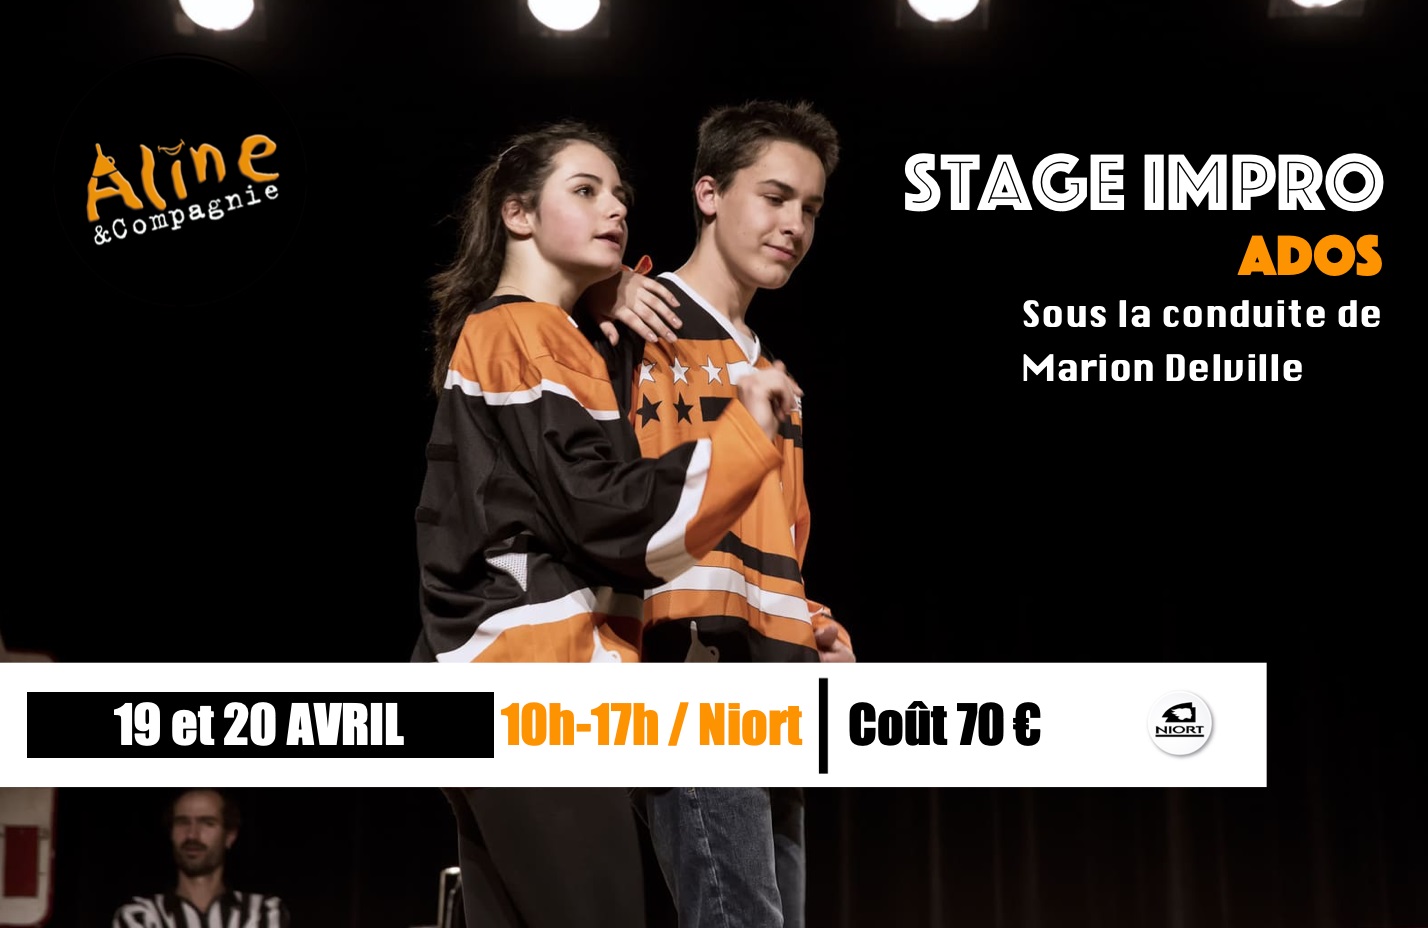 Ados stage